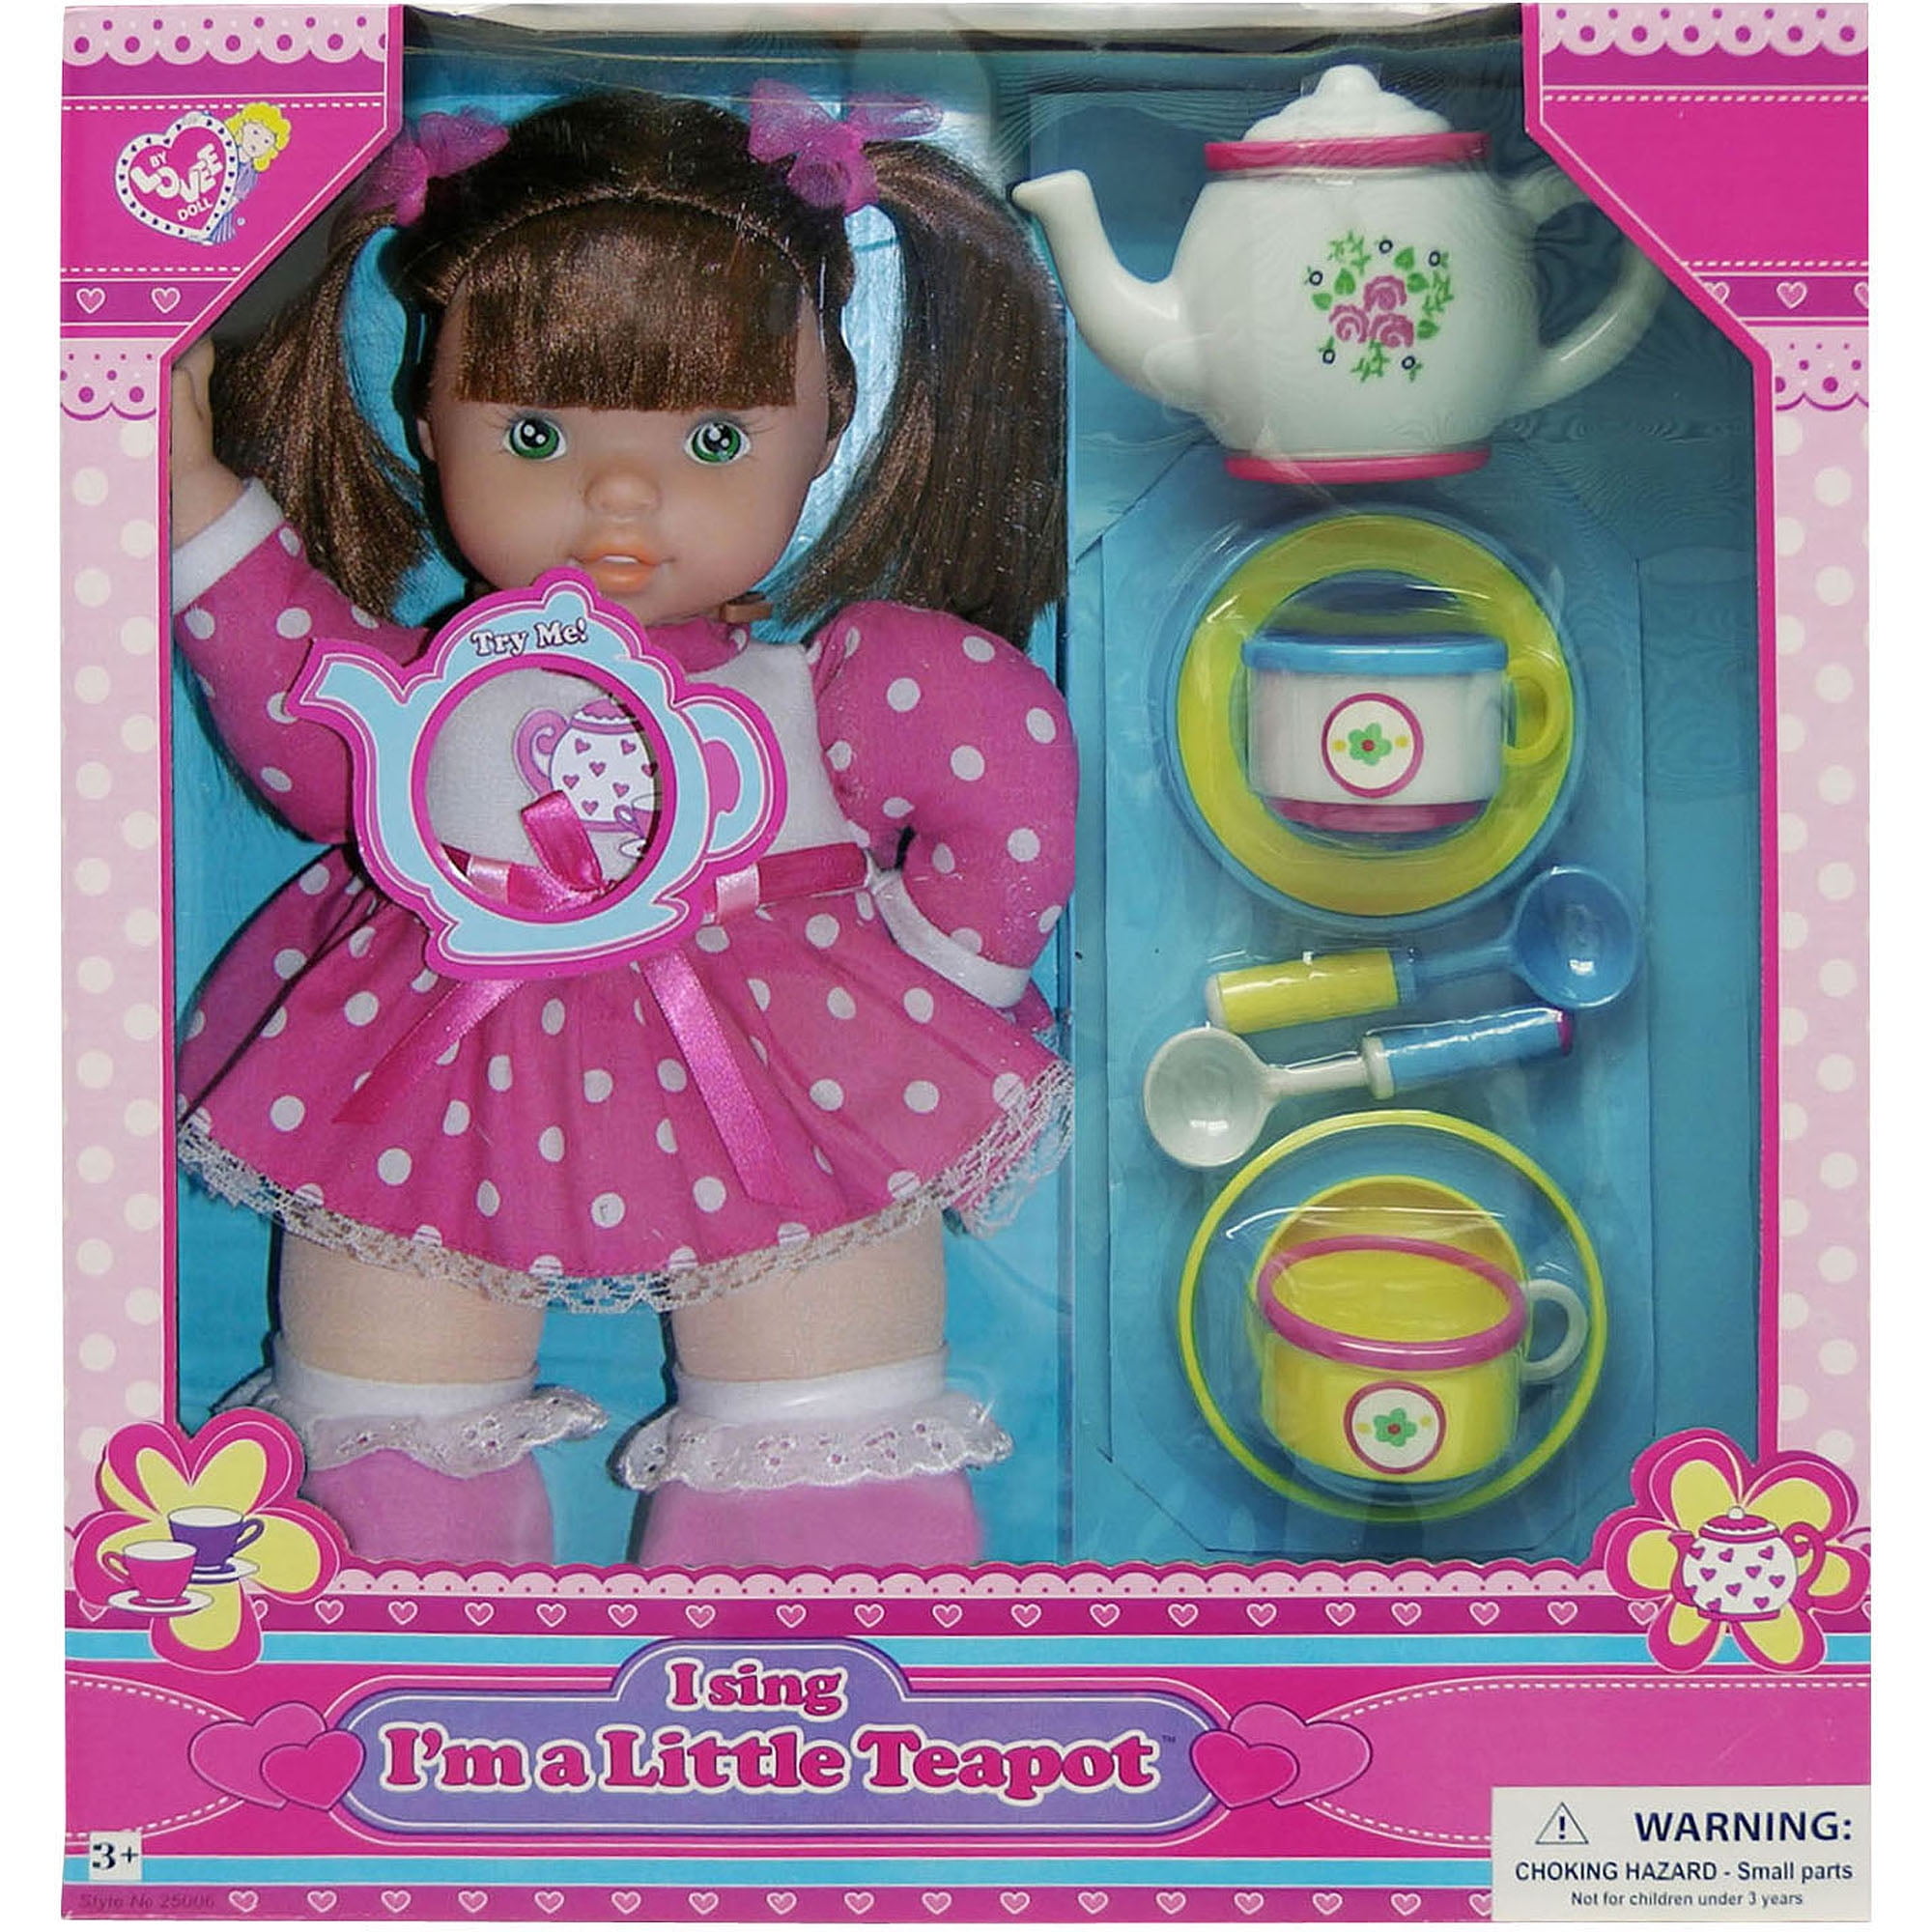 lovee doll and toy company